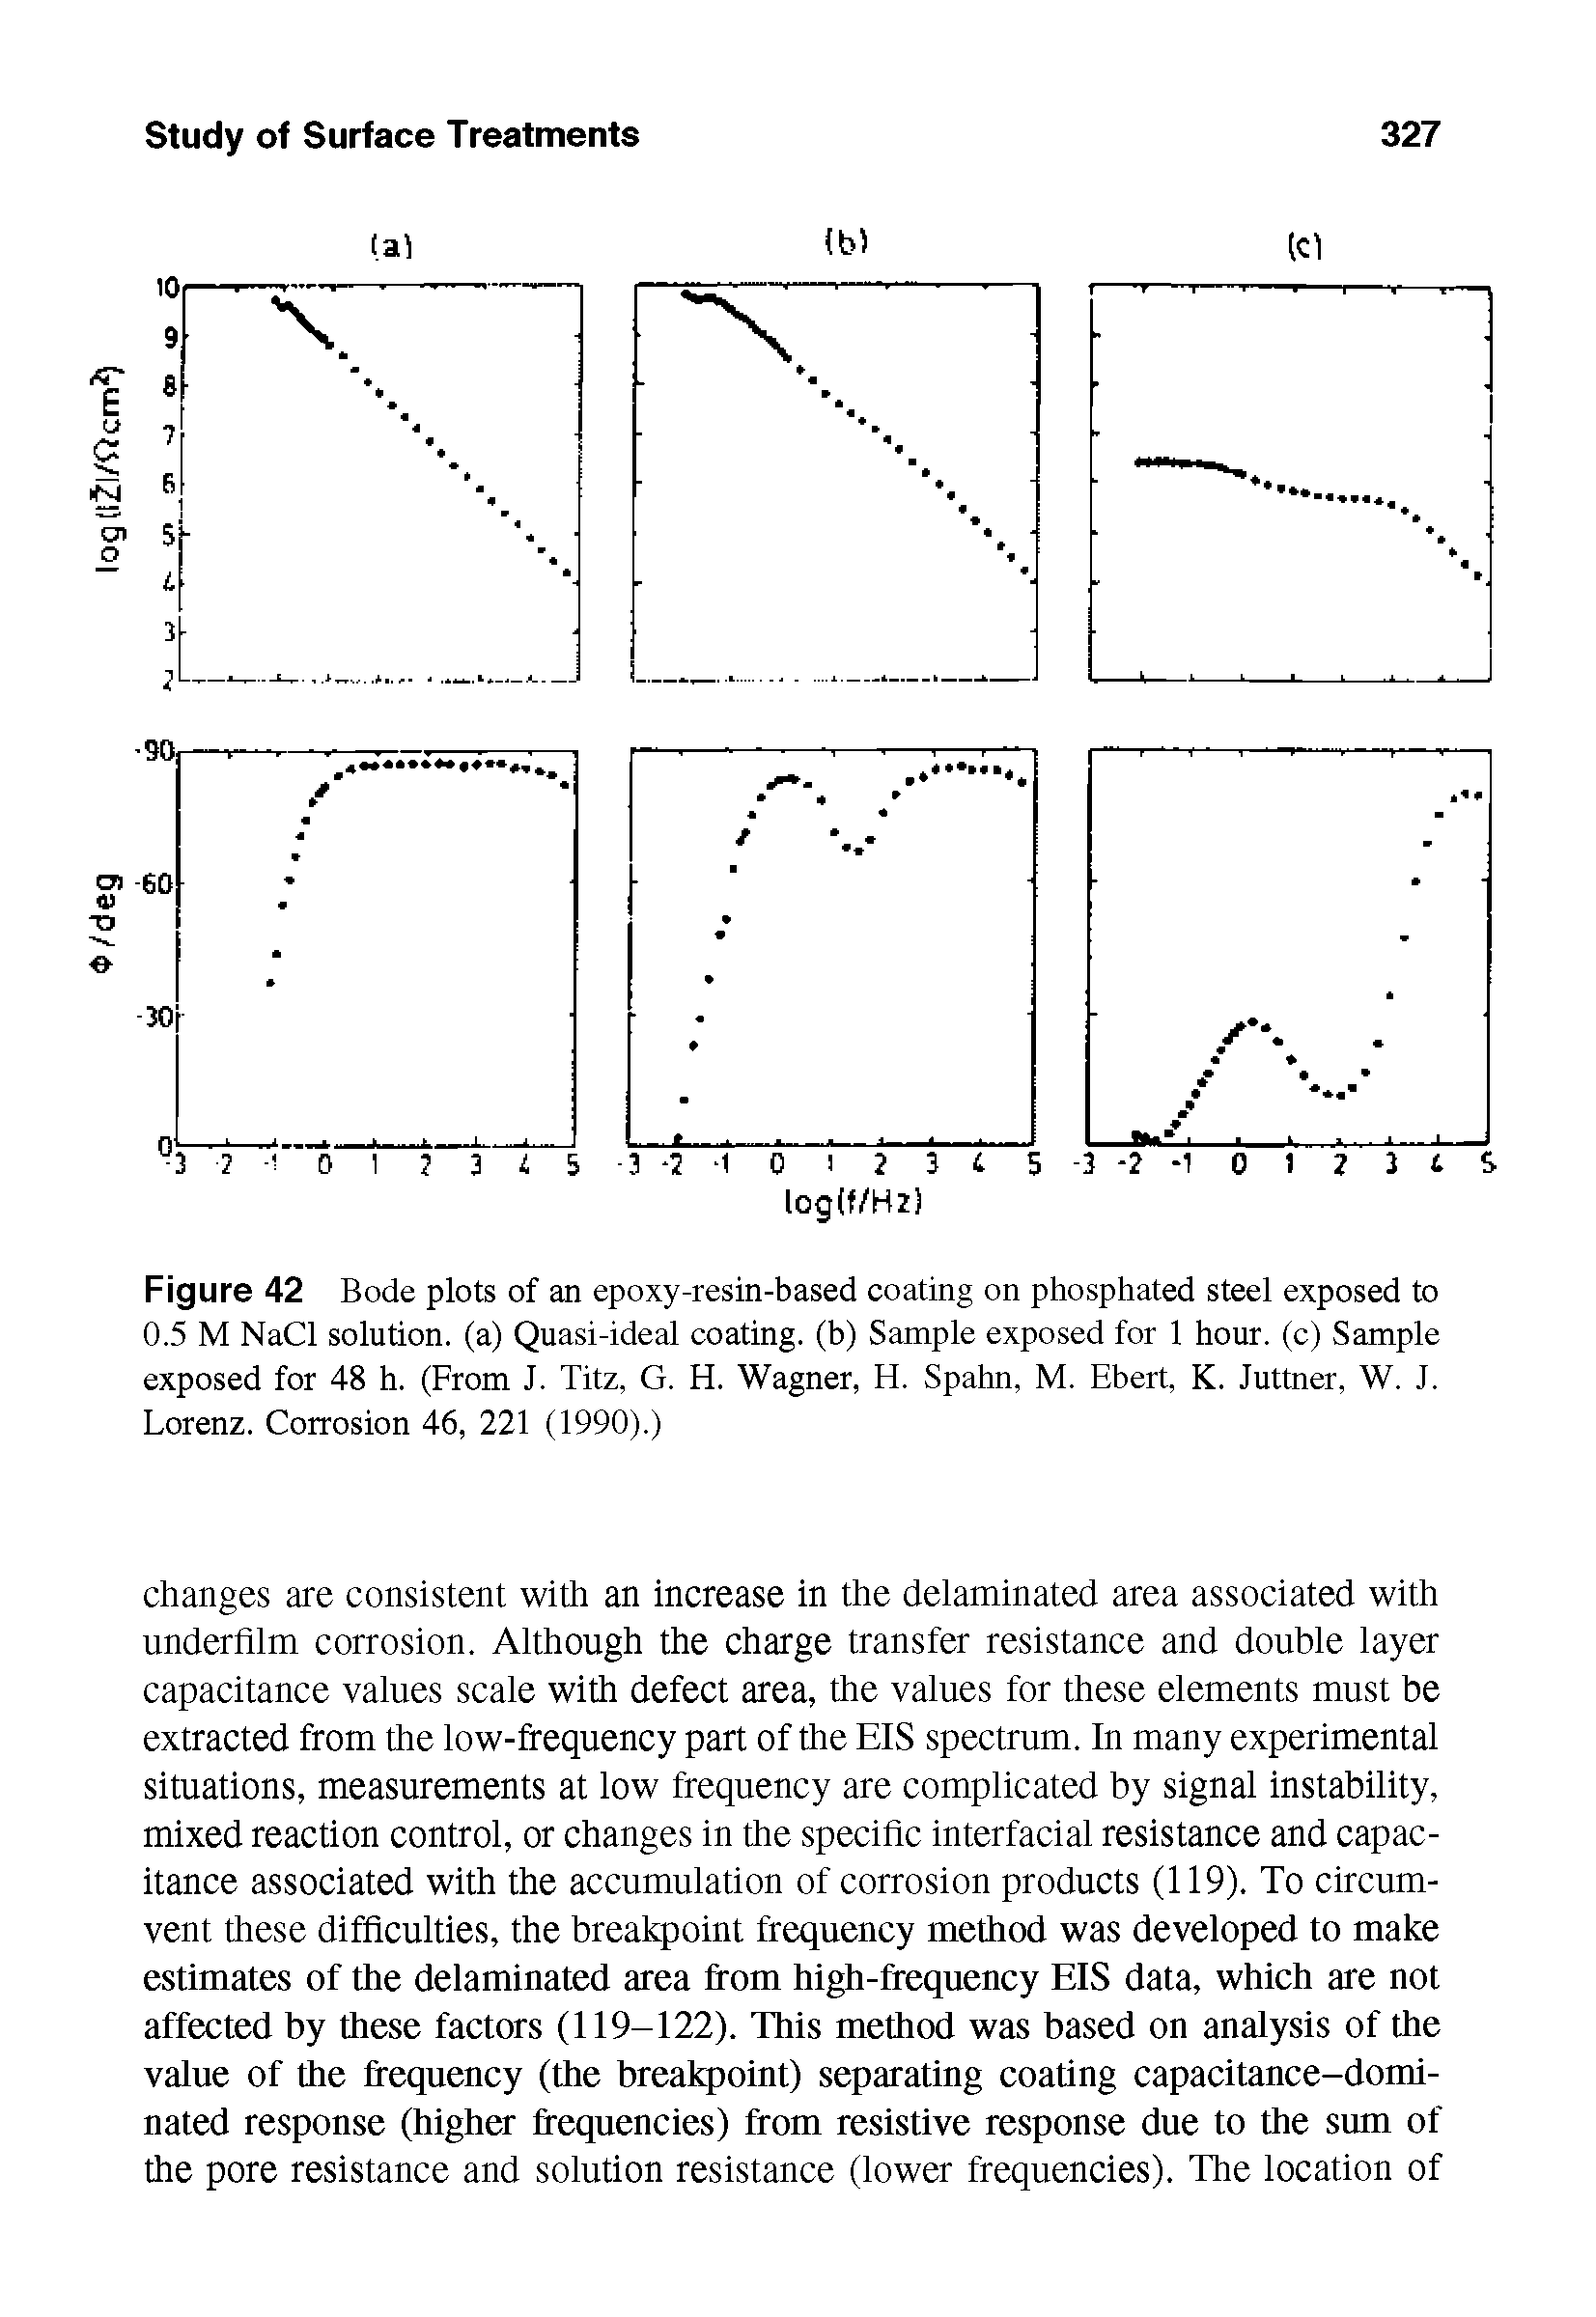 Figure 42 Bode plots of an epoxy-resin-based coating on phosphated steel exposed to 0.5 M NaCl solution, (a) Quasi-ideal coating, (b) Sample exposed for 1 hour, (c) Sample exposed for 48 h. (From J. Titz, G. H. Wagner, H. Spahn, M. Ebert, K. Juttner, W. J. Lorenz. Corrosion 46, 221 (1990).)...